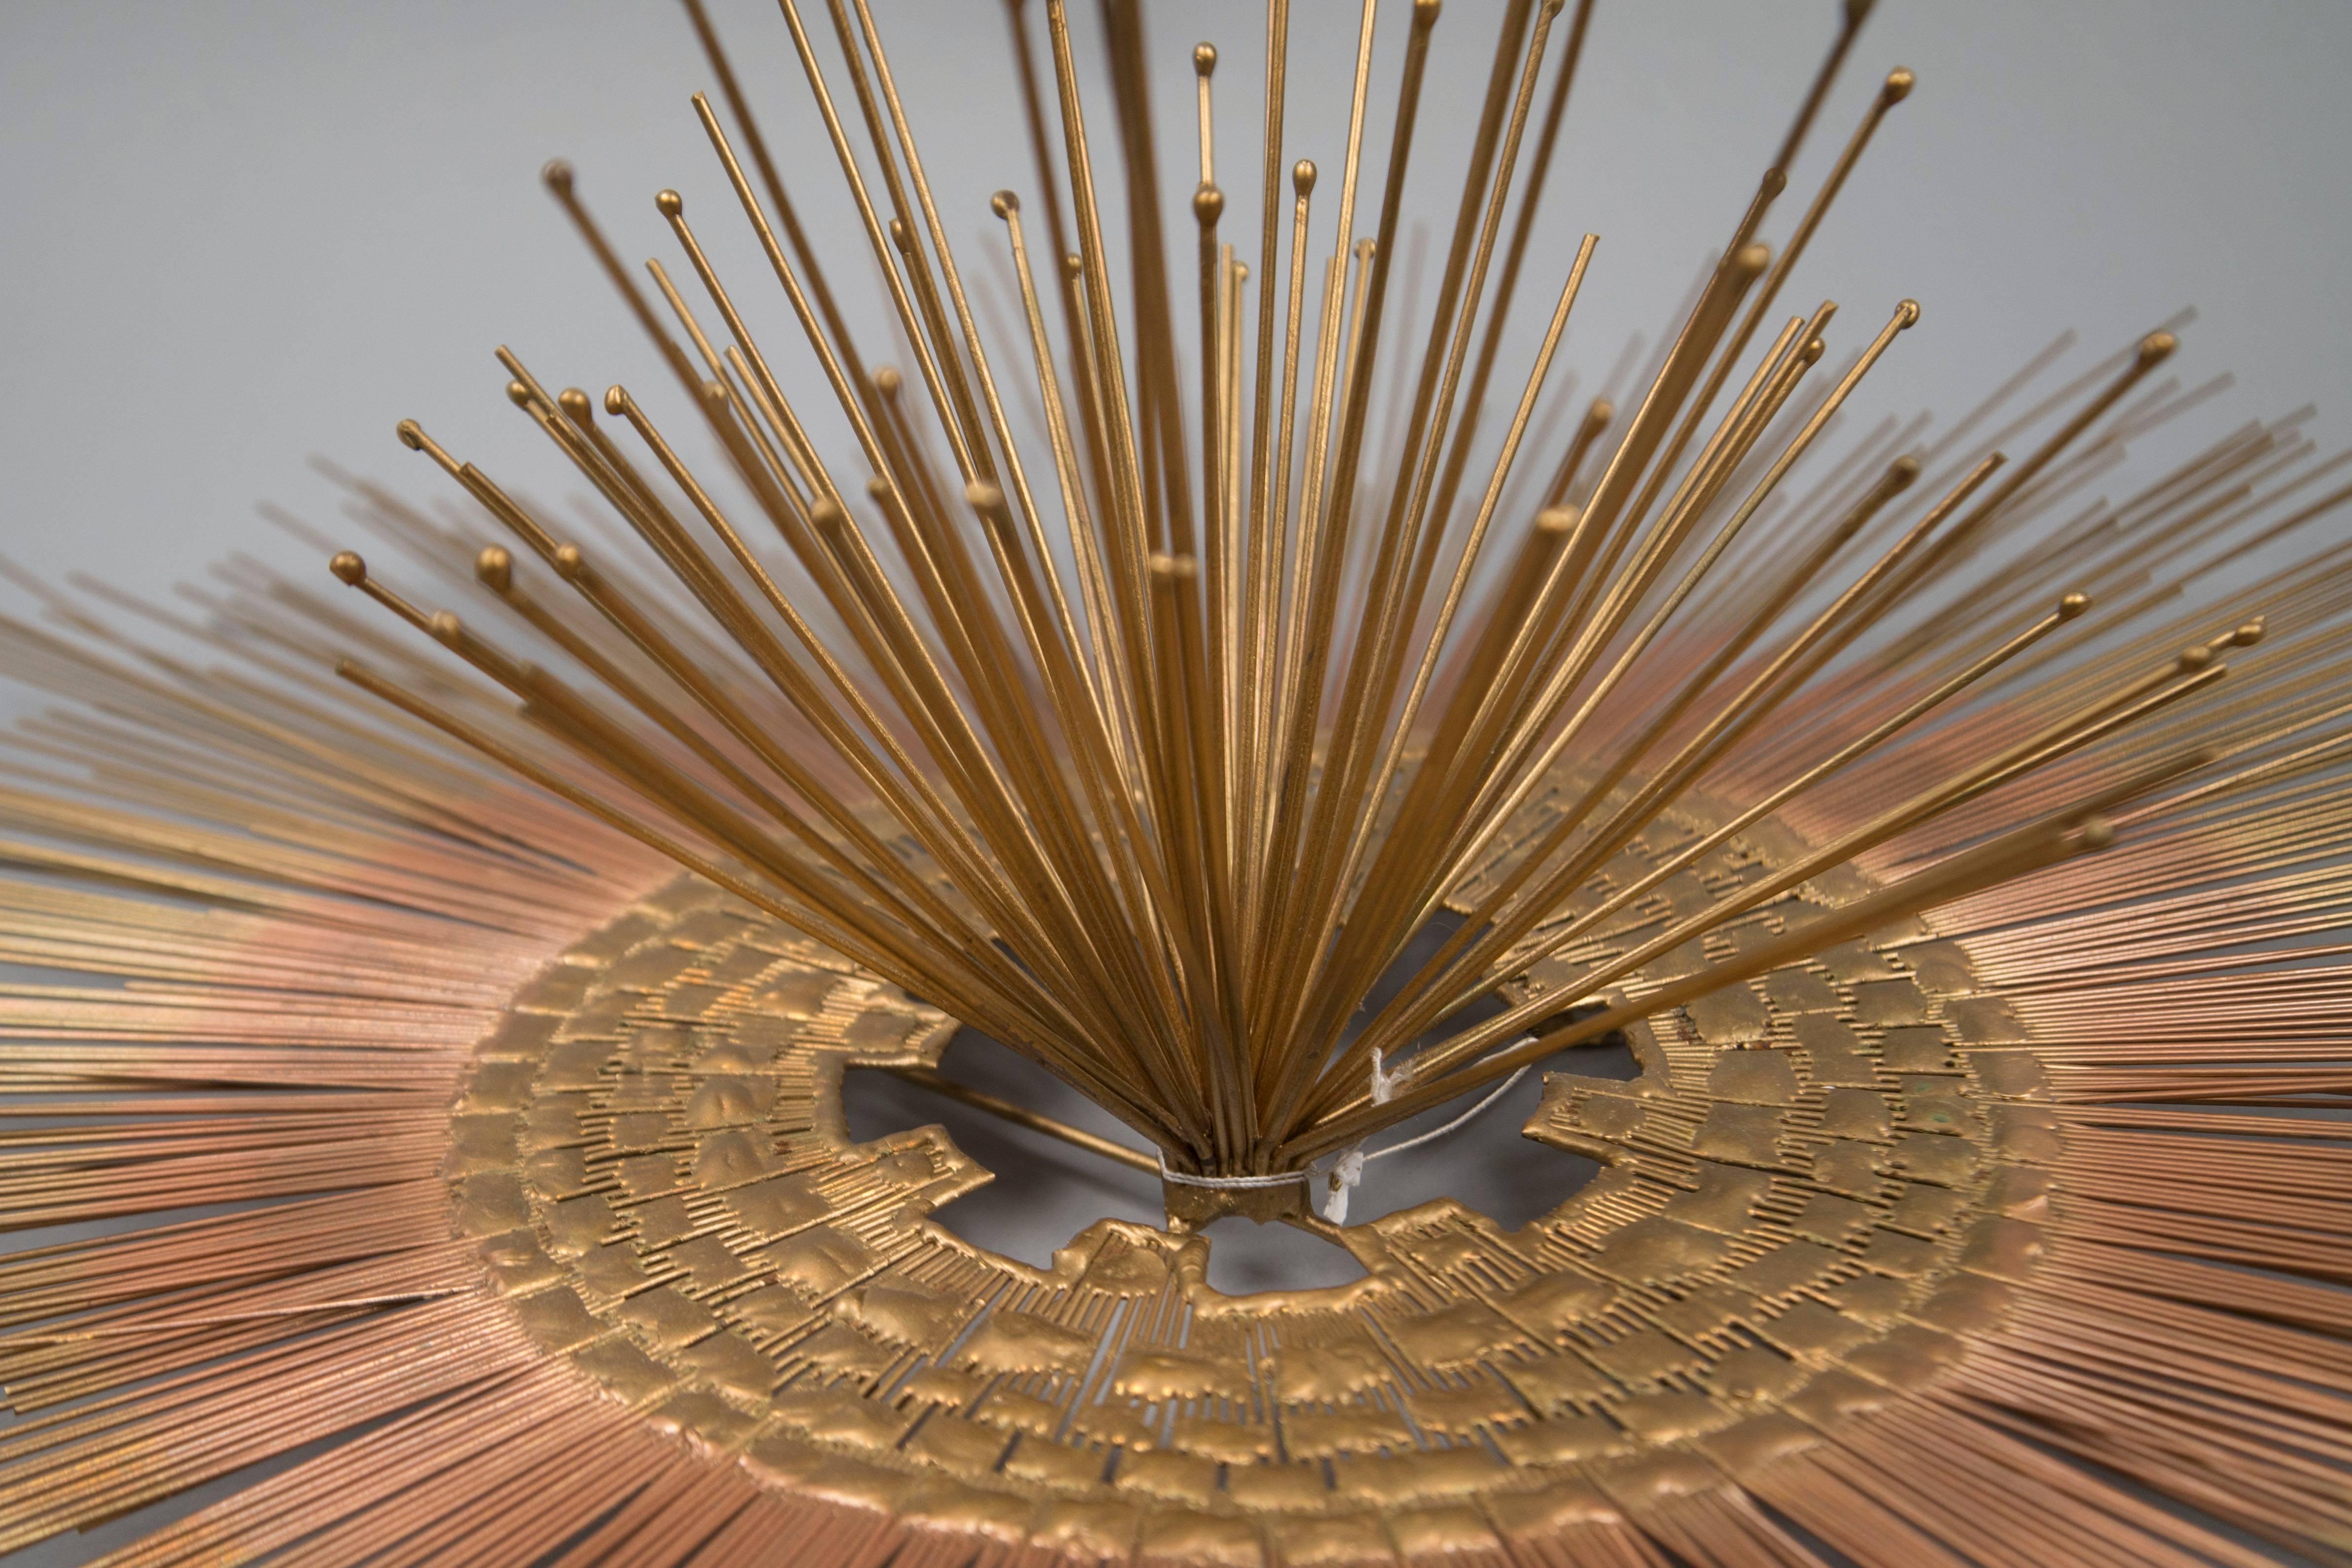 Brass wall sculpture featuring a copper-colored abstract ring around outward facing pins, sitting atop radiating brass rods of varying lengths.

Diameter: 30